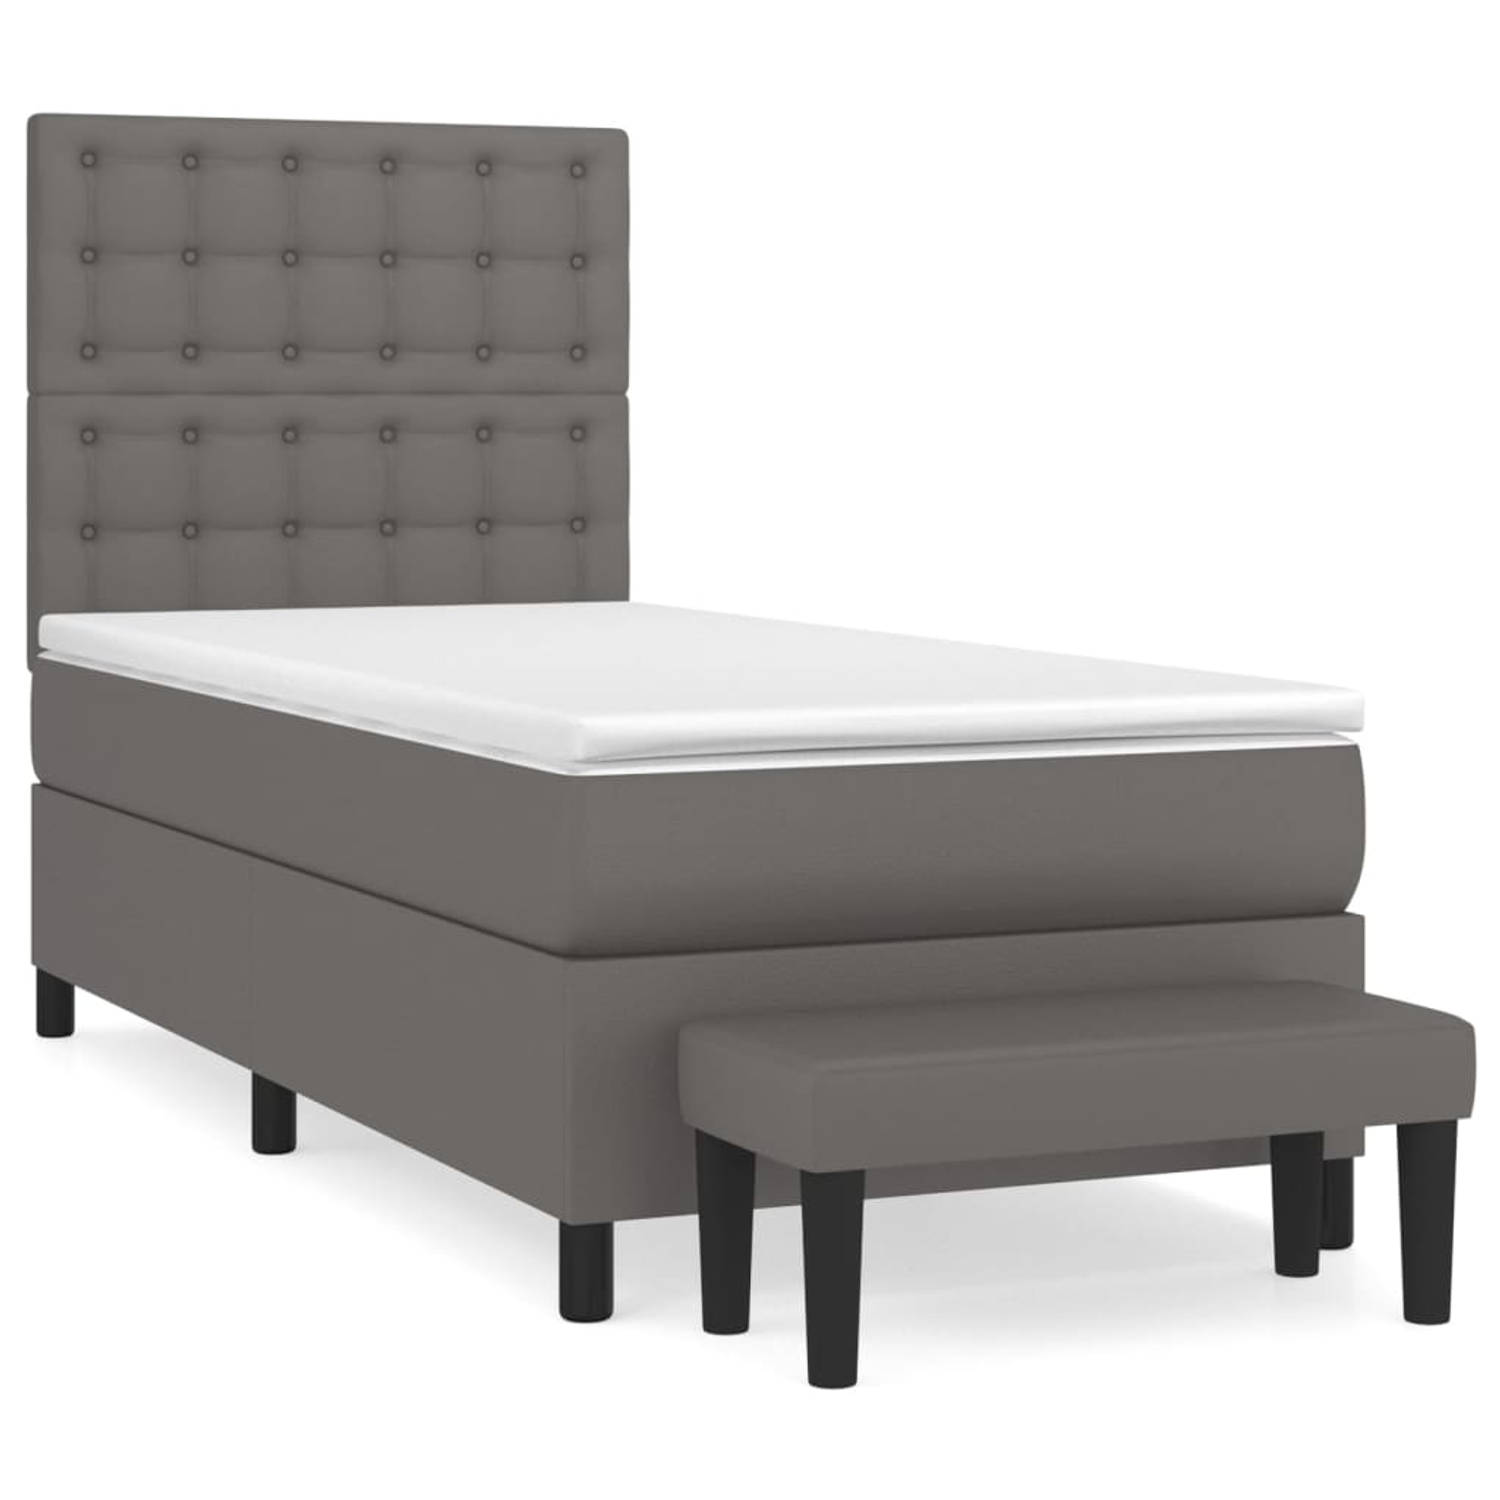 The Living Store Boxspringbed s - Bed - 193 x 90 cm - Duurzaam kunstleer